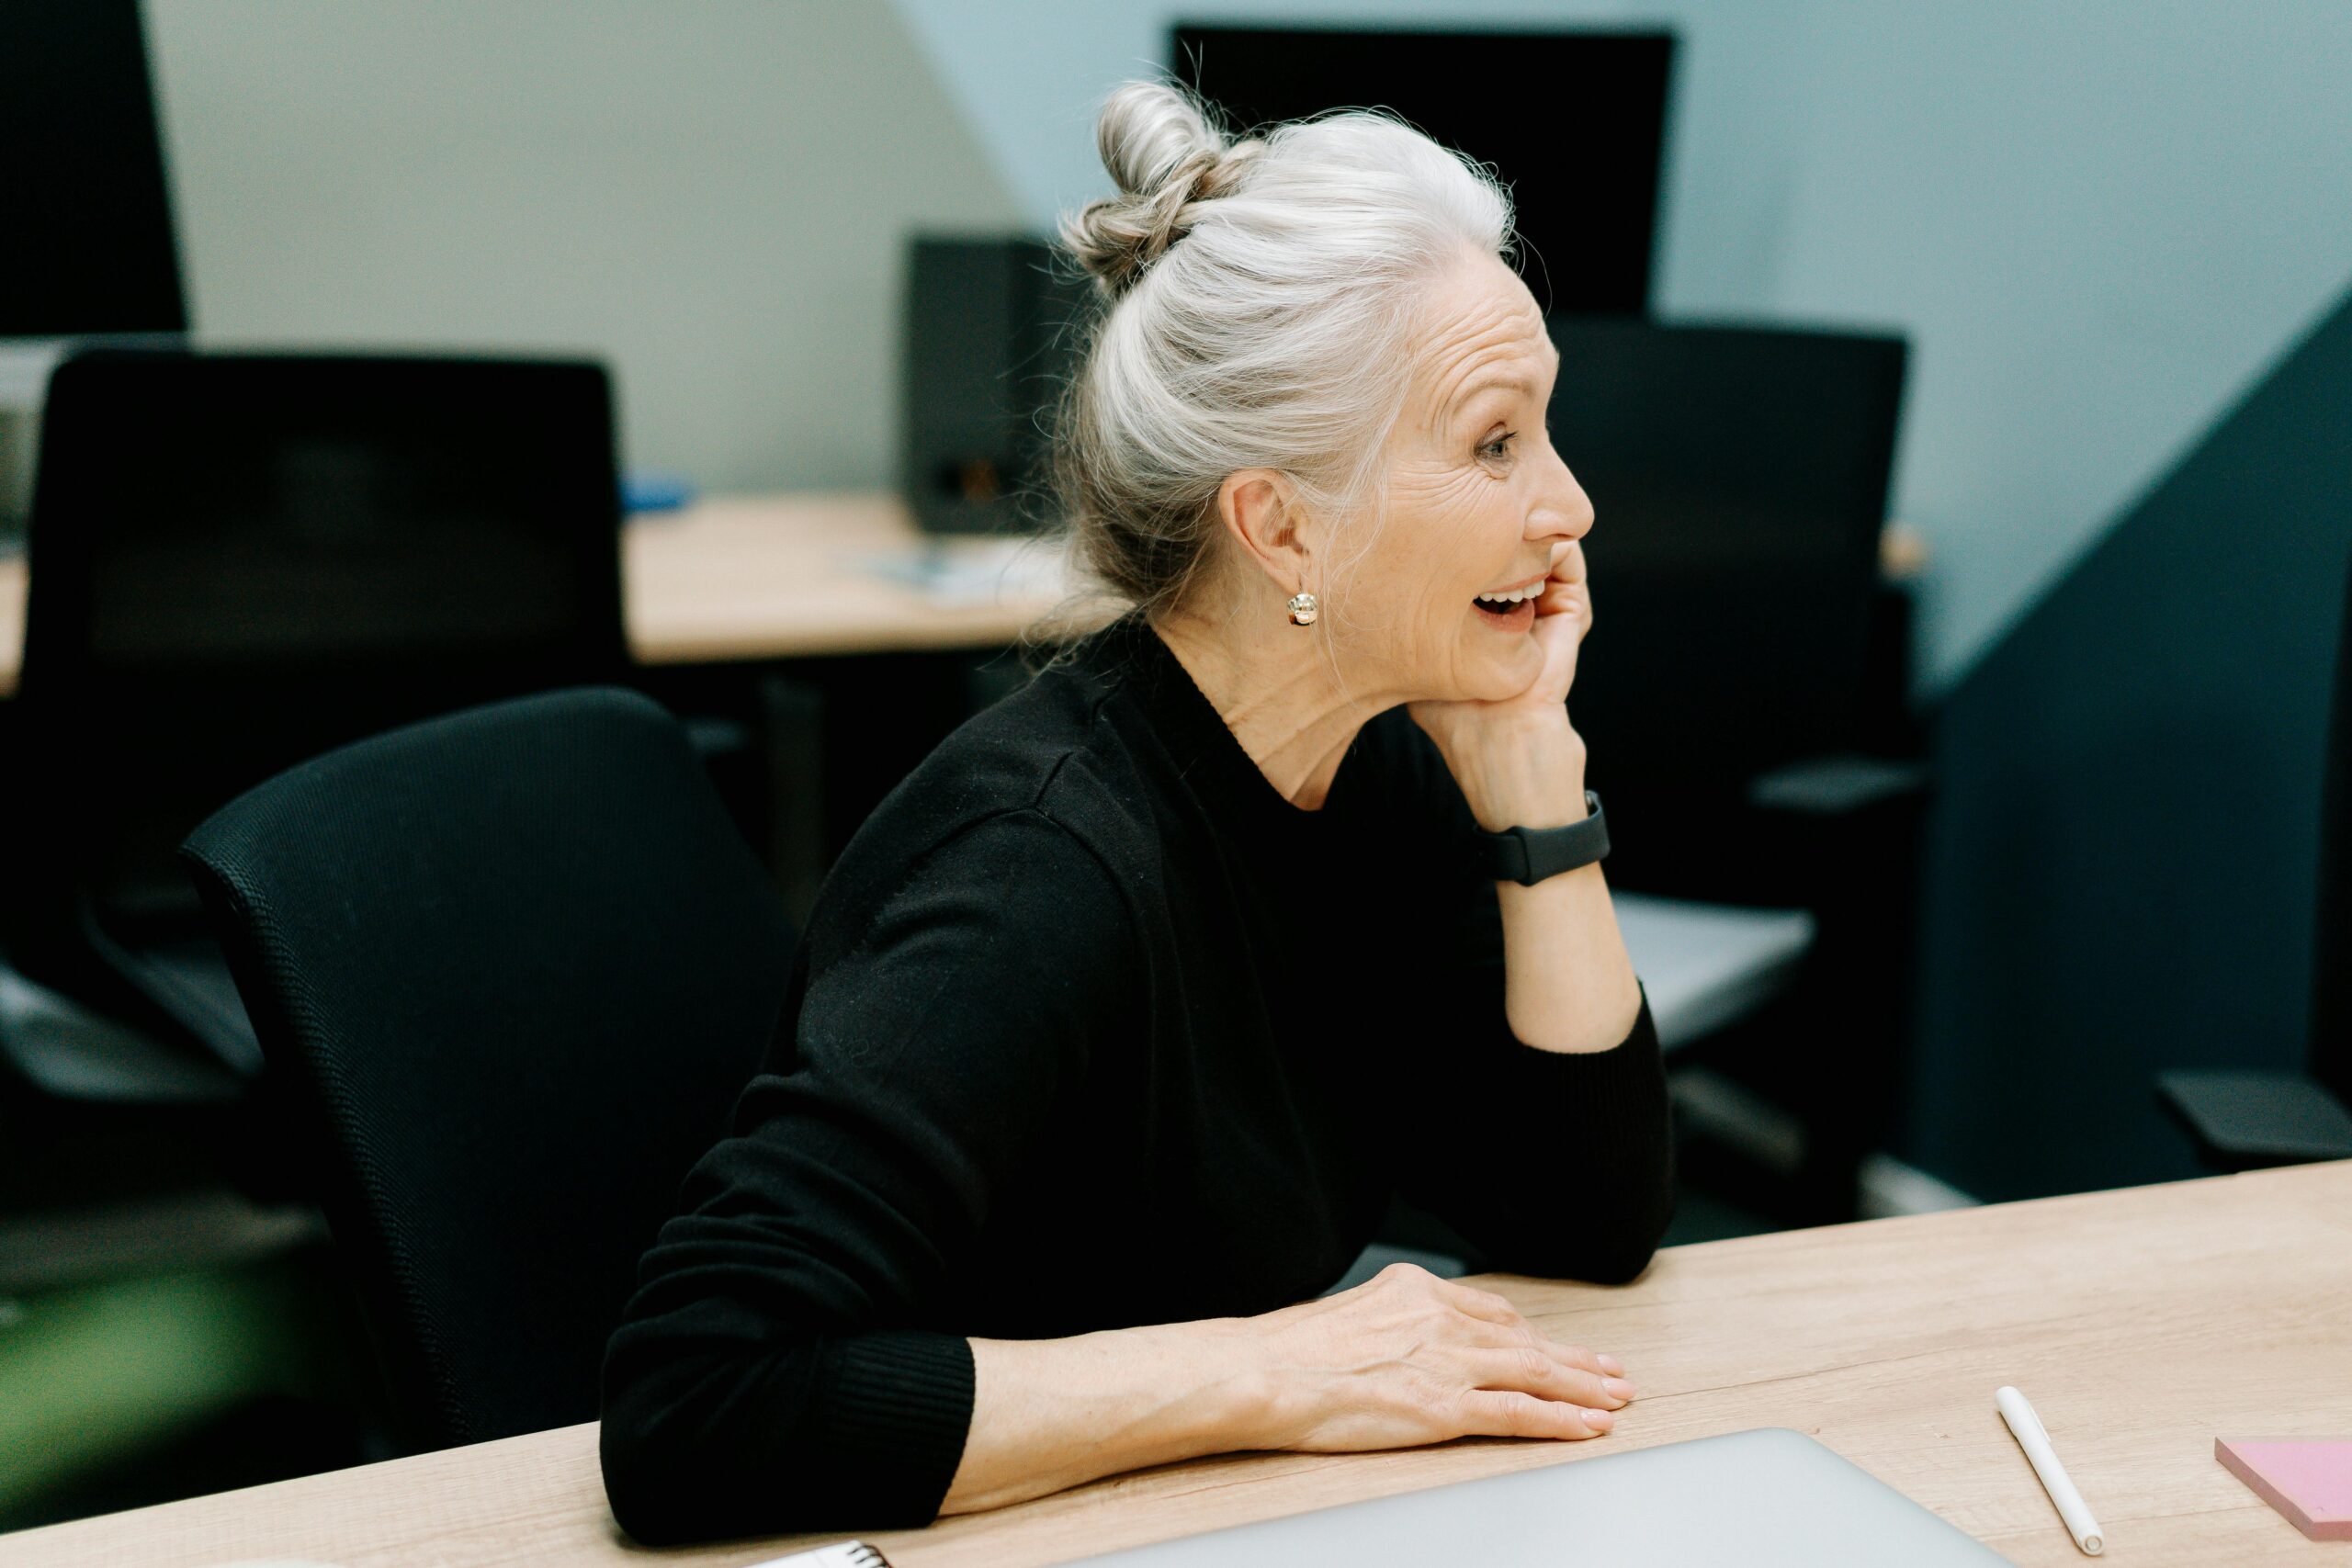 Older employee laughing after receiving thanks